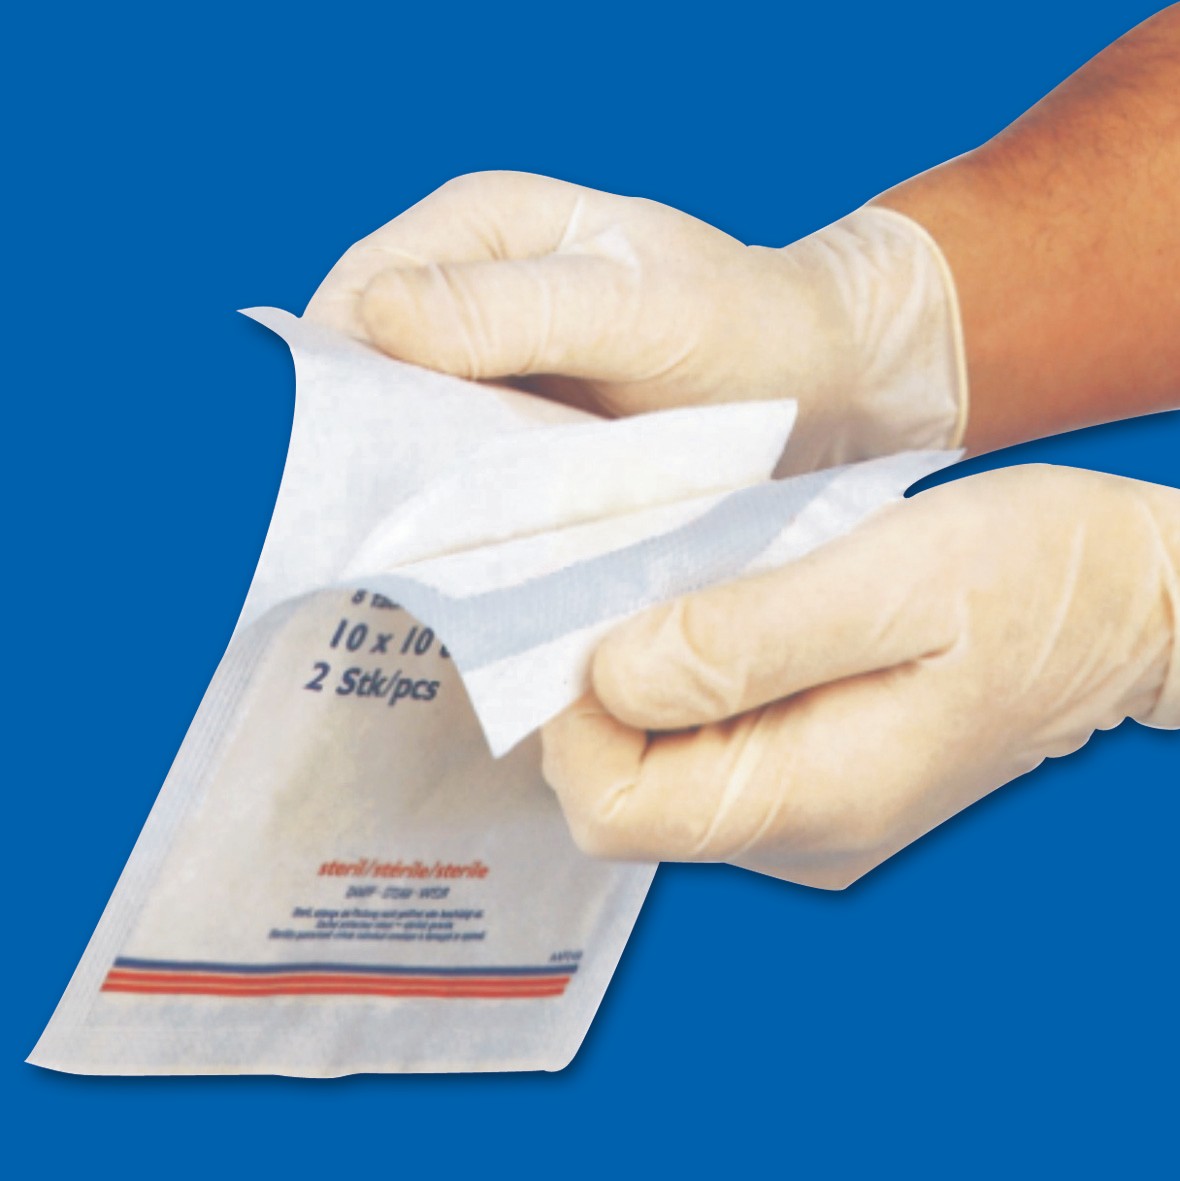 Surgical Glove Wallet Paper for packaging surgical gloves,Medical grade paper and no fluorescence, available for sterilization by EO and gamma